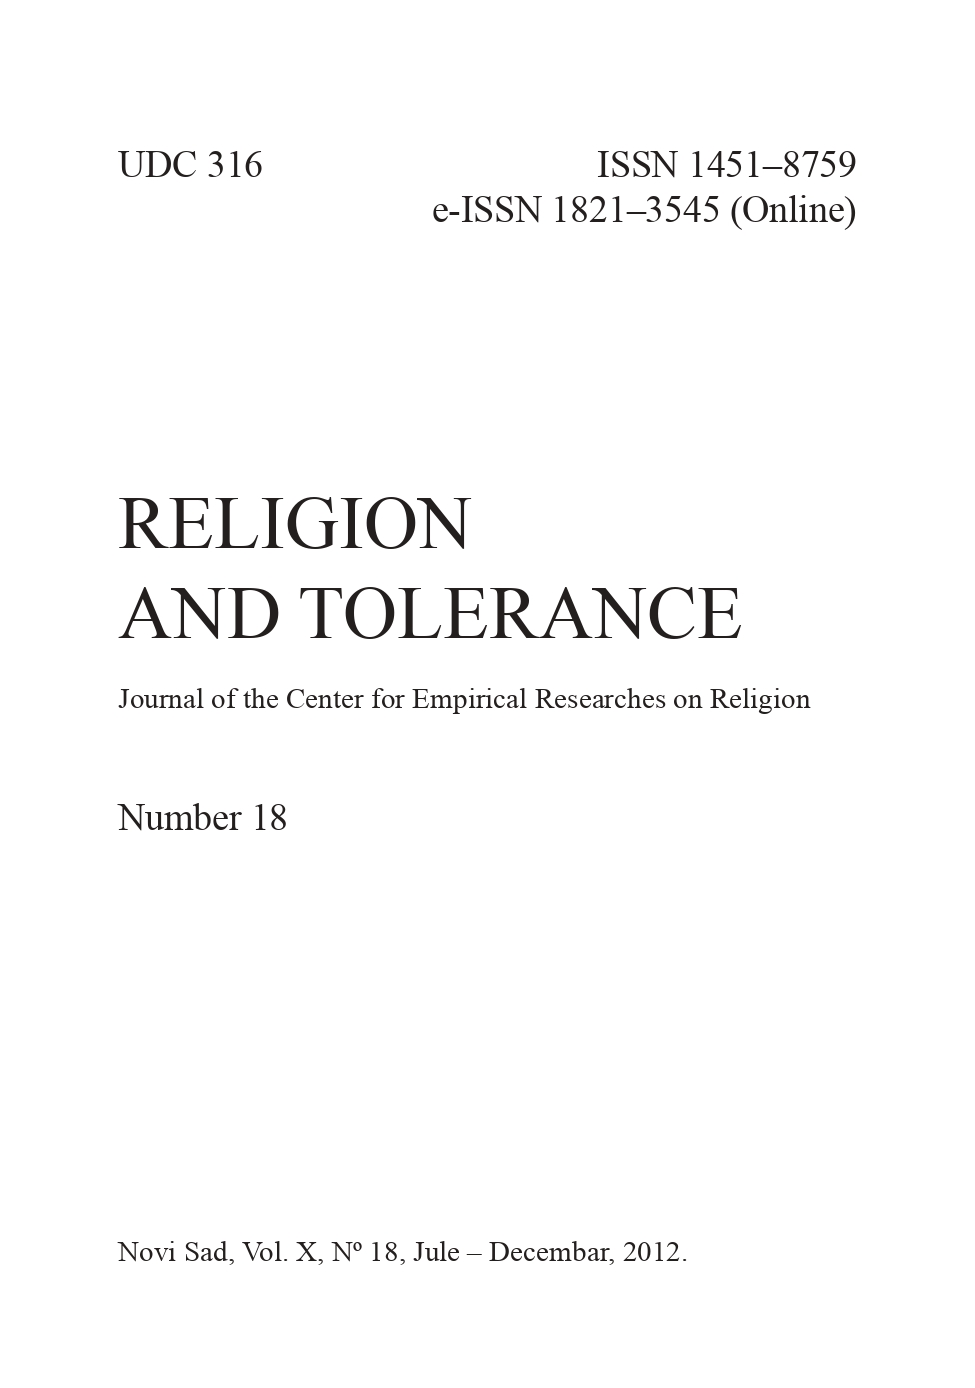 THE TENTH ANNIVERSARY OF THE JOURNAL „RELIGION AND TOLERANCE“ Cover Image